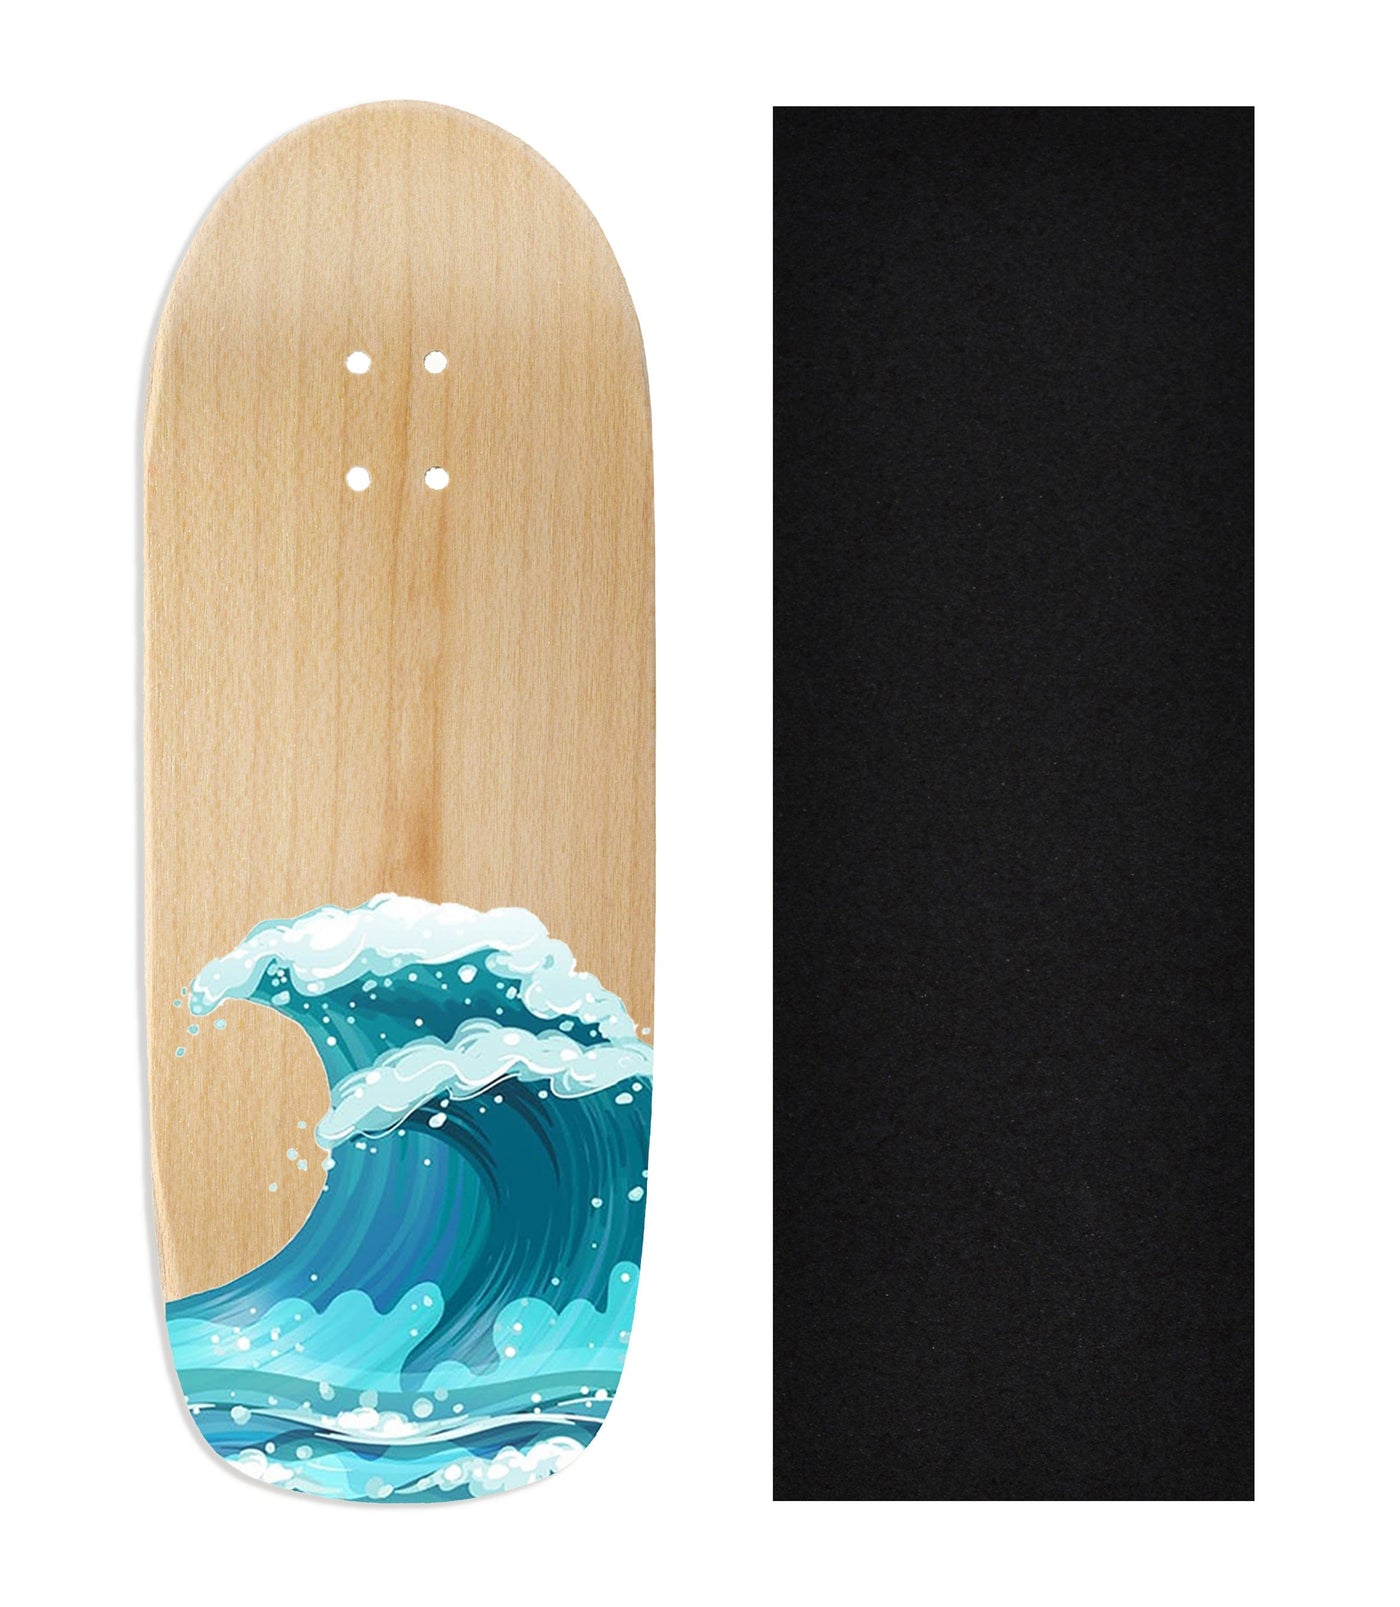 Teak Tuning Heat Transfer Graphic Wooden Fingerboard Deck, "Waves" Poolparty Deck